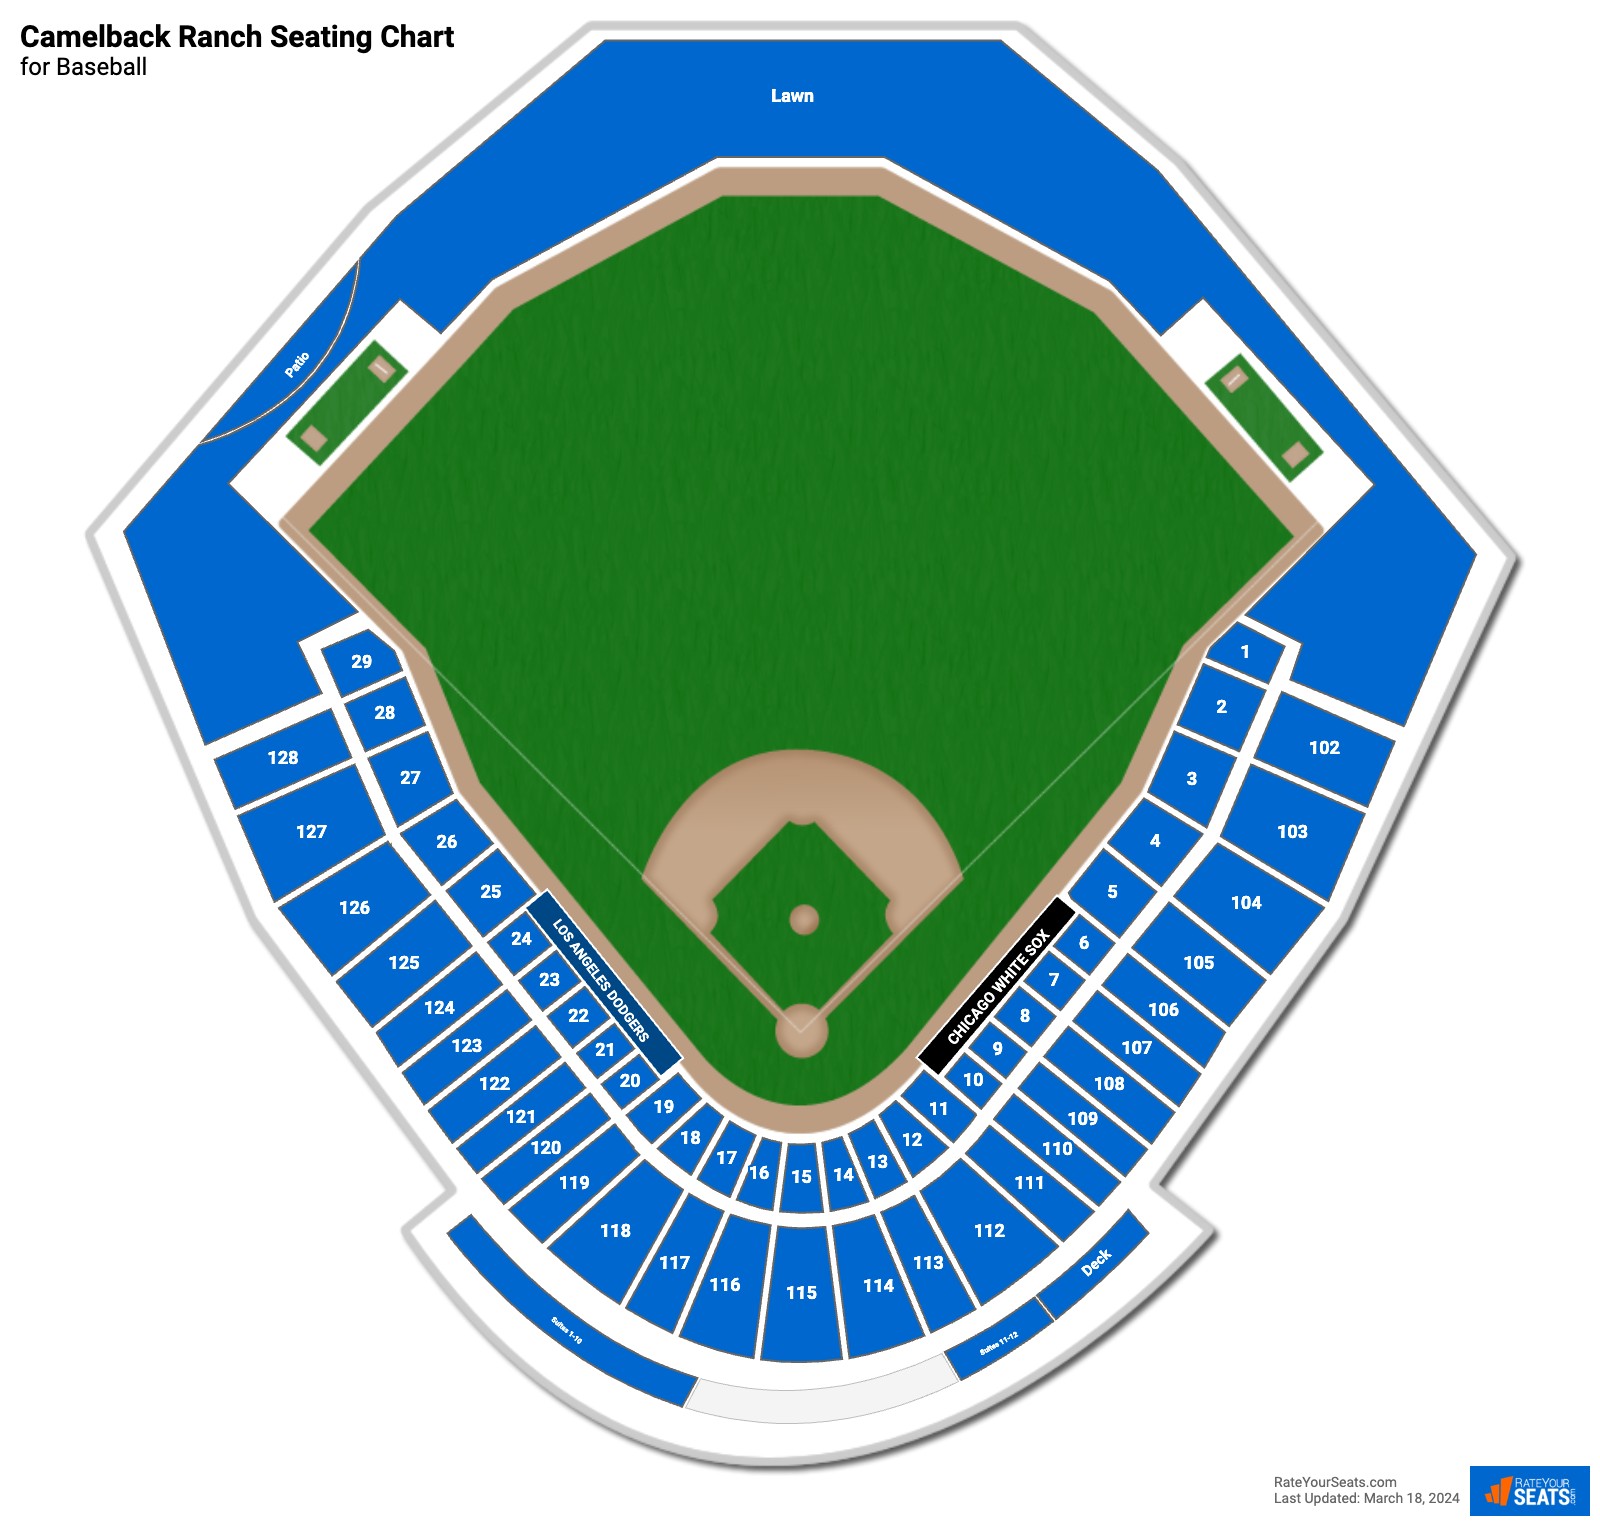 Camelback Ranch Seating Charts - RateYourSeats.com